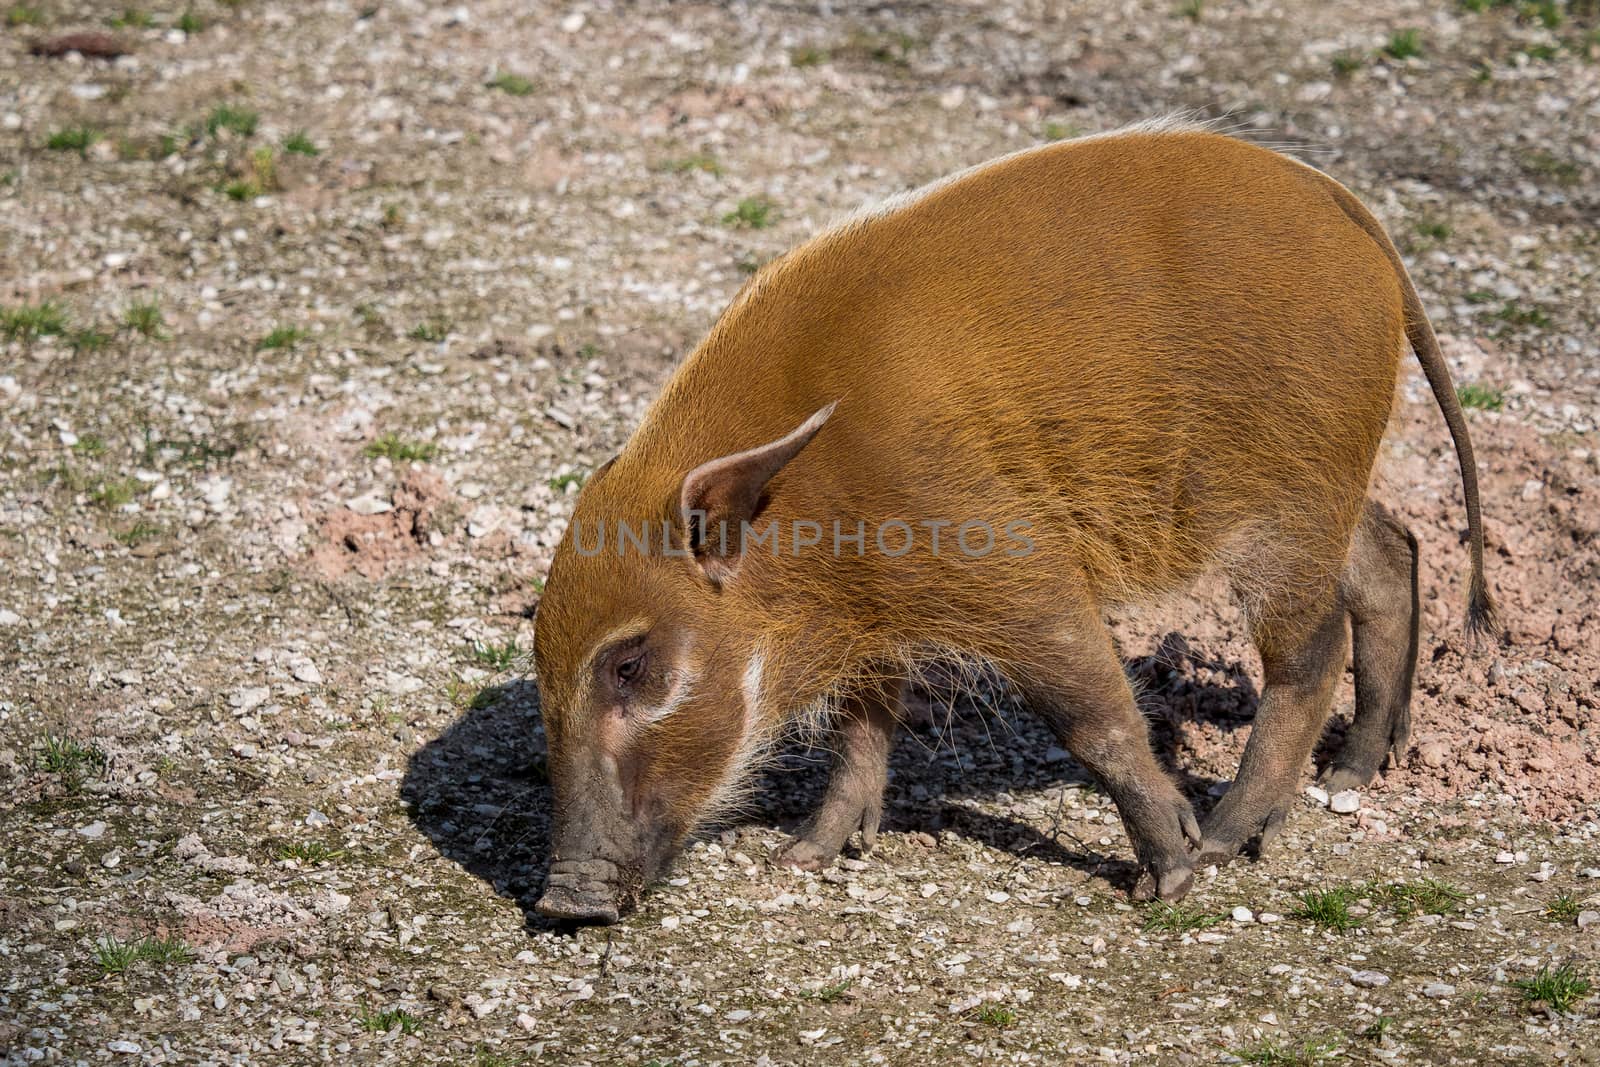 Red river hog (Potamochoerus porcus), also known as the bush pig by xtrekx